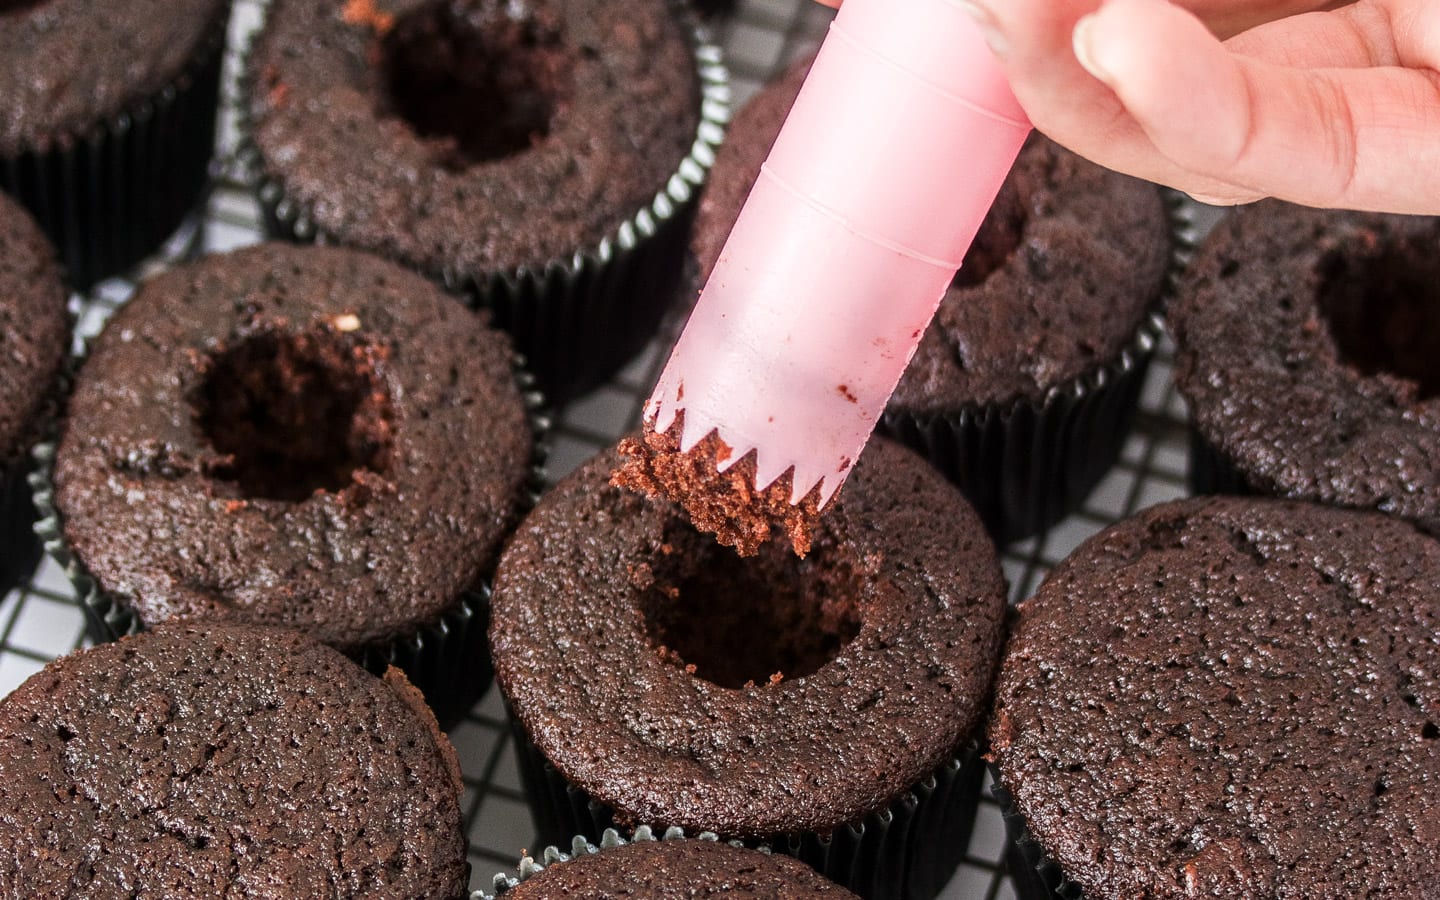 Cutting the core out of the cupcake using a pink cupcake corer.